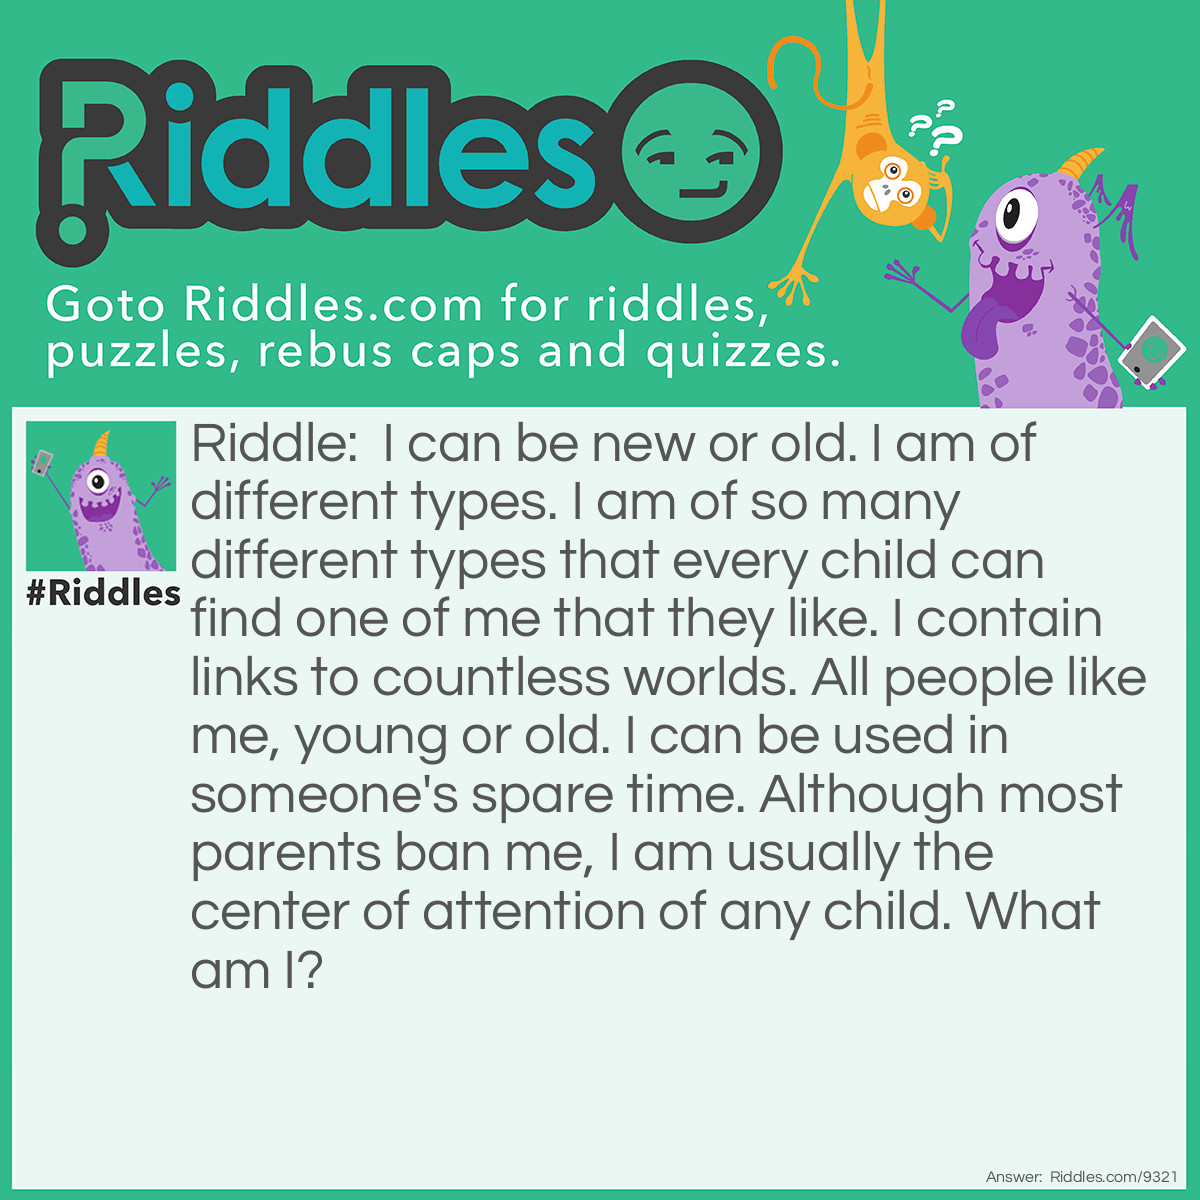 Riddle: I can be new or old. I am of different types. I am of so many different types that every child can find one of me that they like. I contain links to countless worlds. All people like me, young or old. I can be used in someone's spare time. Although most parents ban me, I am usually the center of attention of any child. What am I? Answer: Video Games!